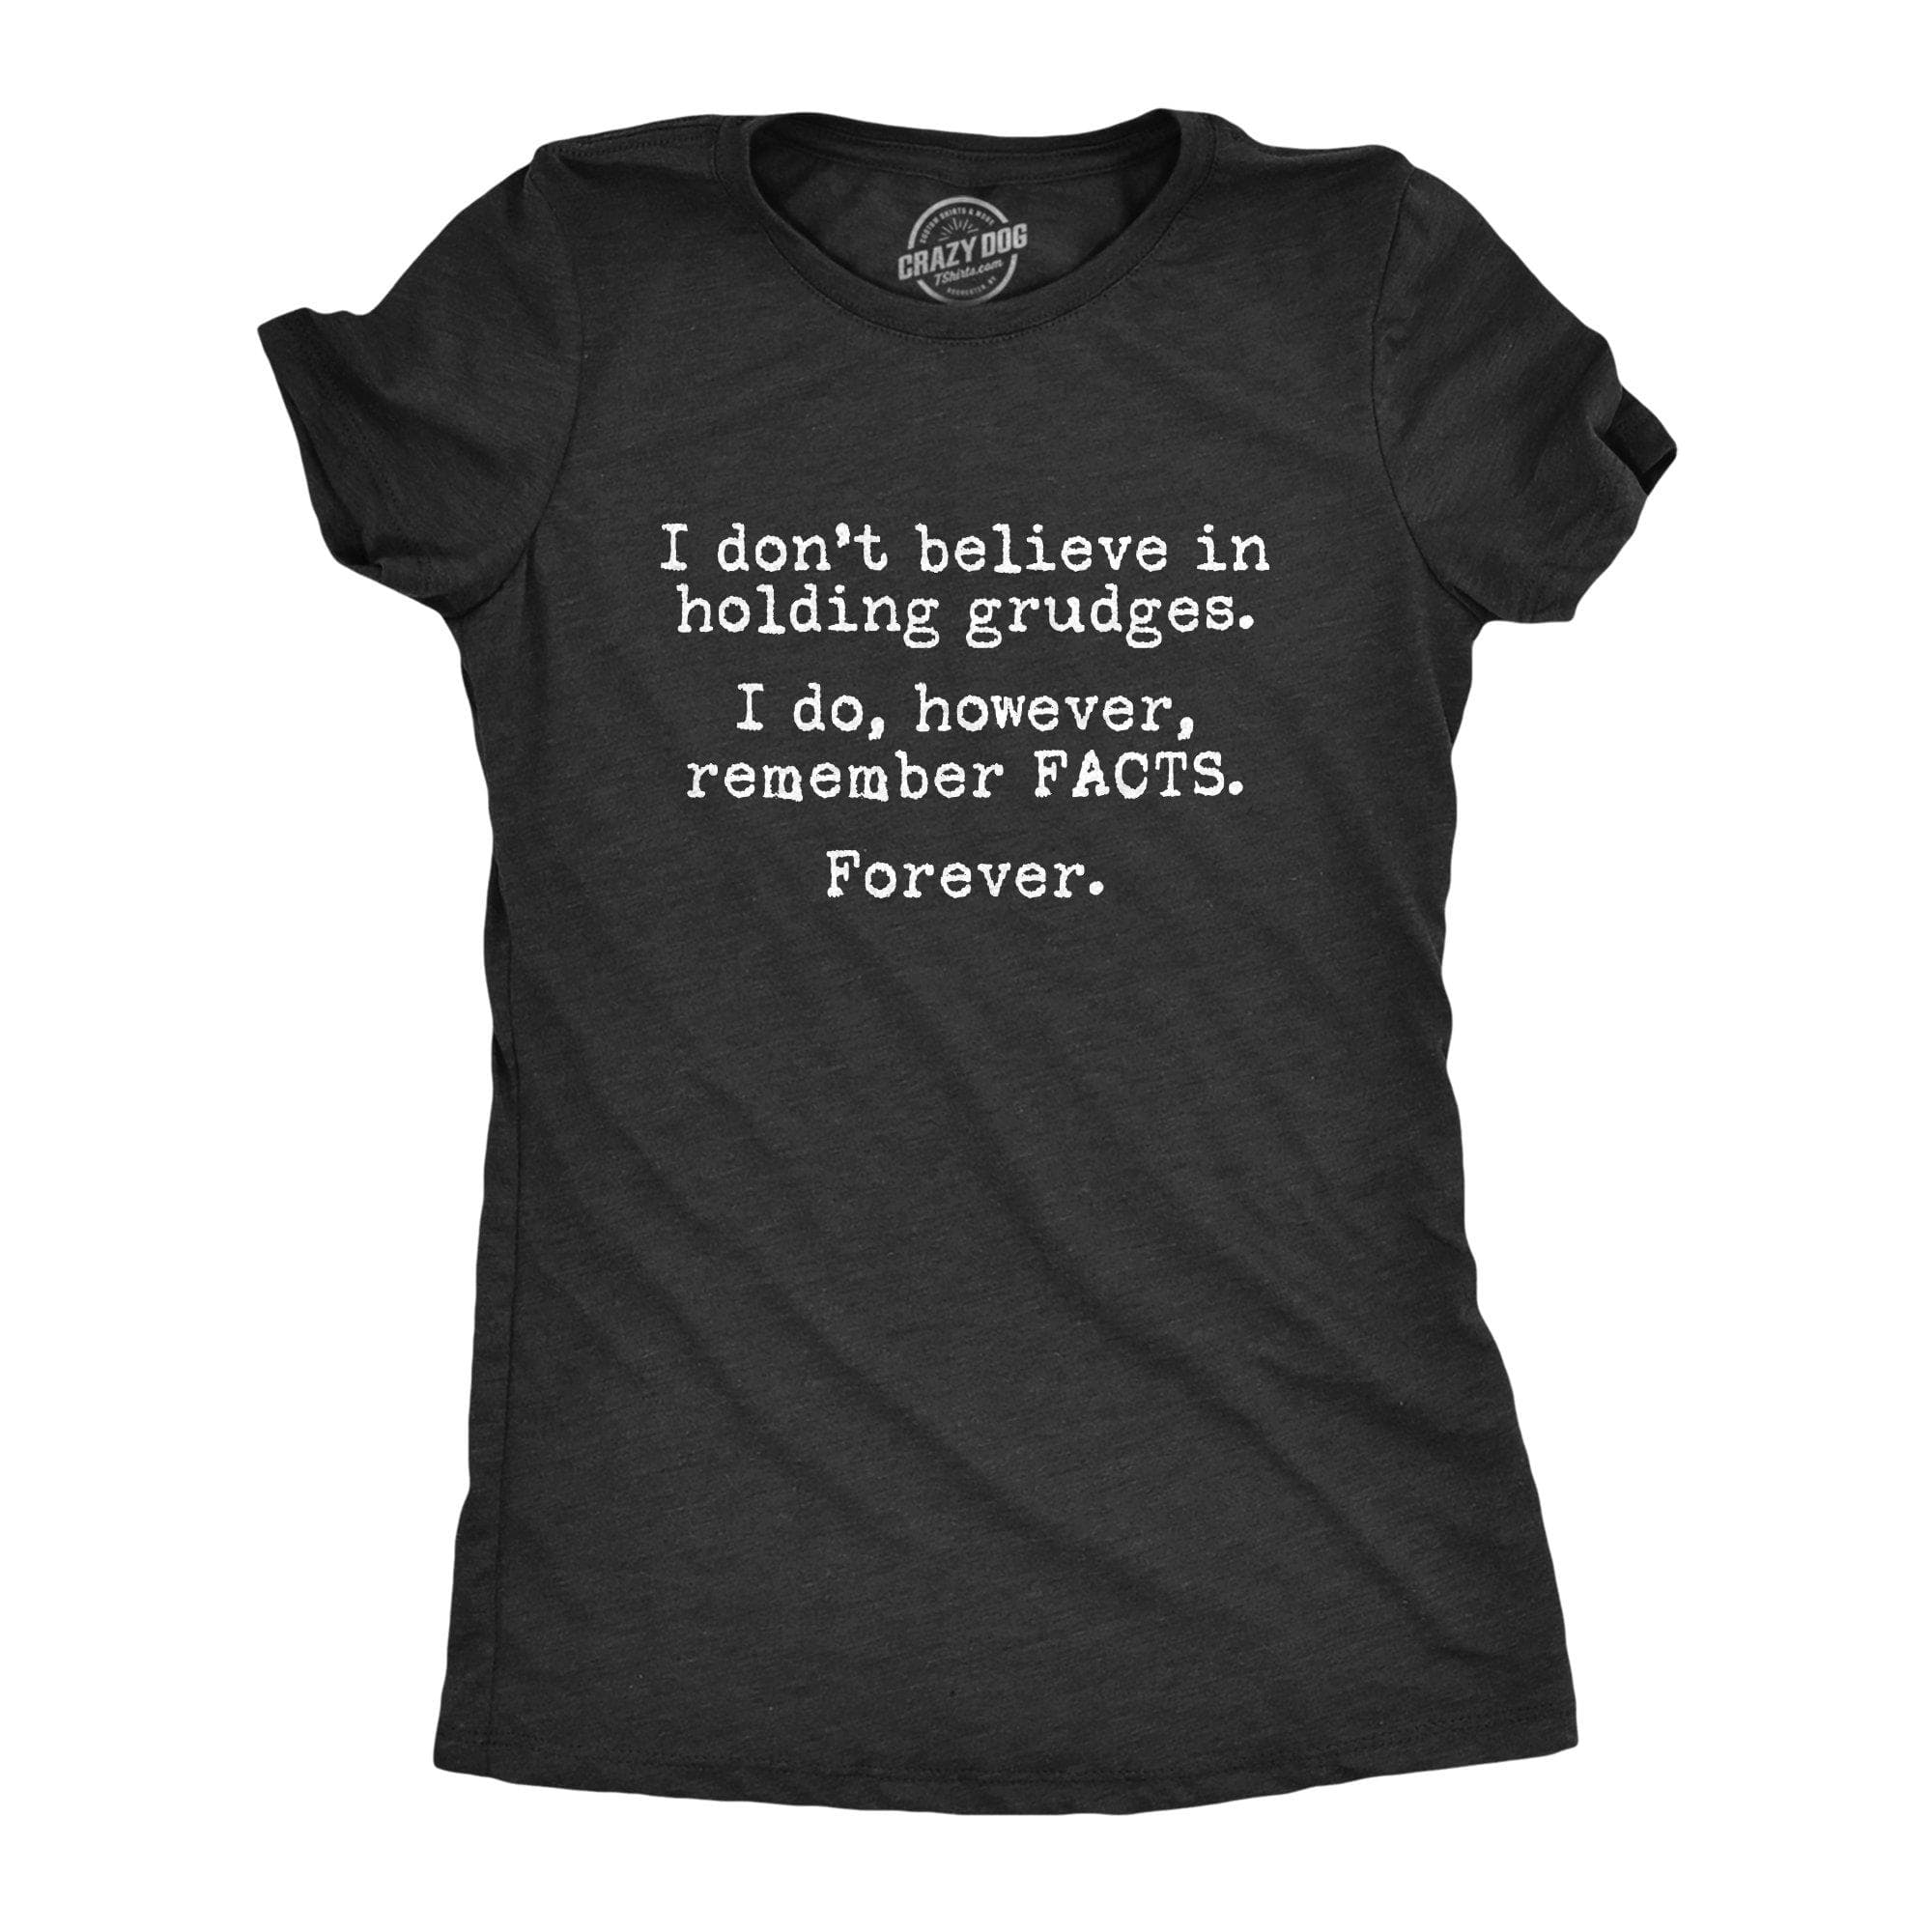 I Remember Facts Forever Women's Tshirt - Crazy Dog T-Shirts